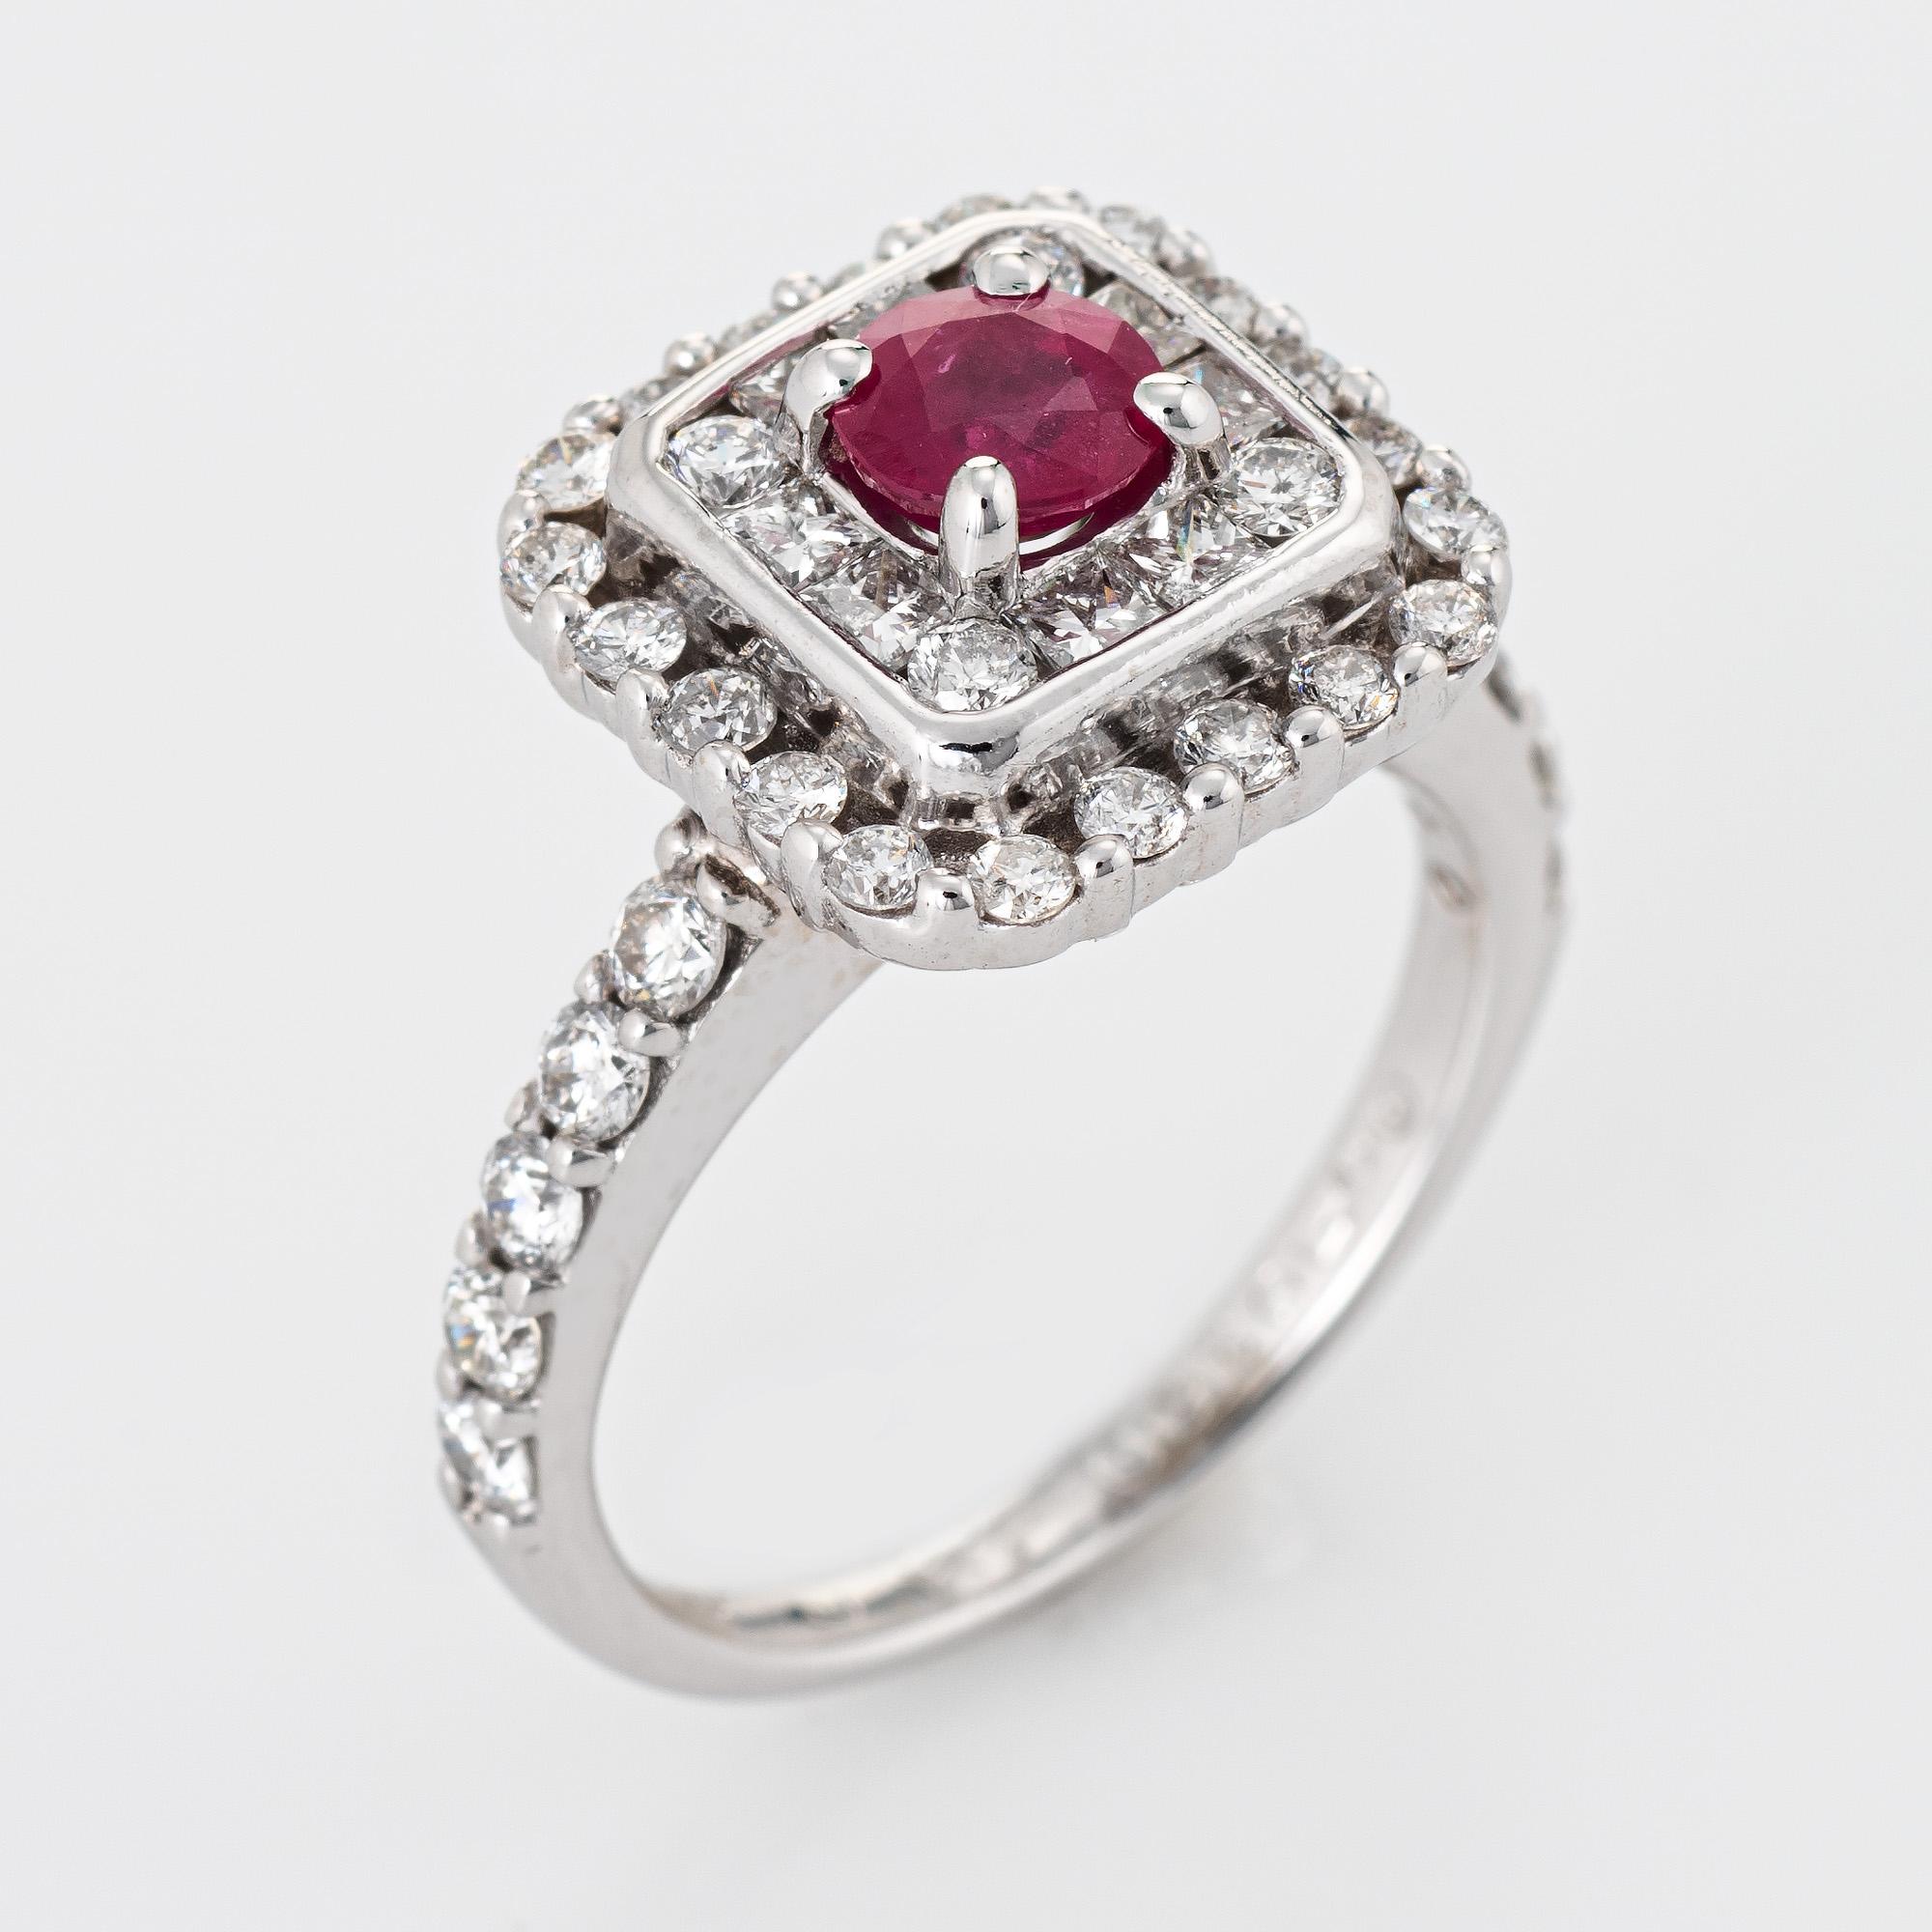 Stylish Burma ruby & diamond square cocktail ring crafted in 14 karat white gold. 

No heat natural Burma ruby is estimated at 0.63 carats. The diamonds total an estimated 1.41 carats (estimated at G-H color and VS2-SI1 clarity). The ruby is in